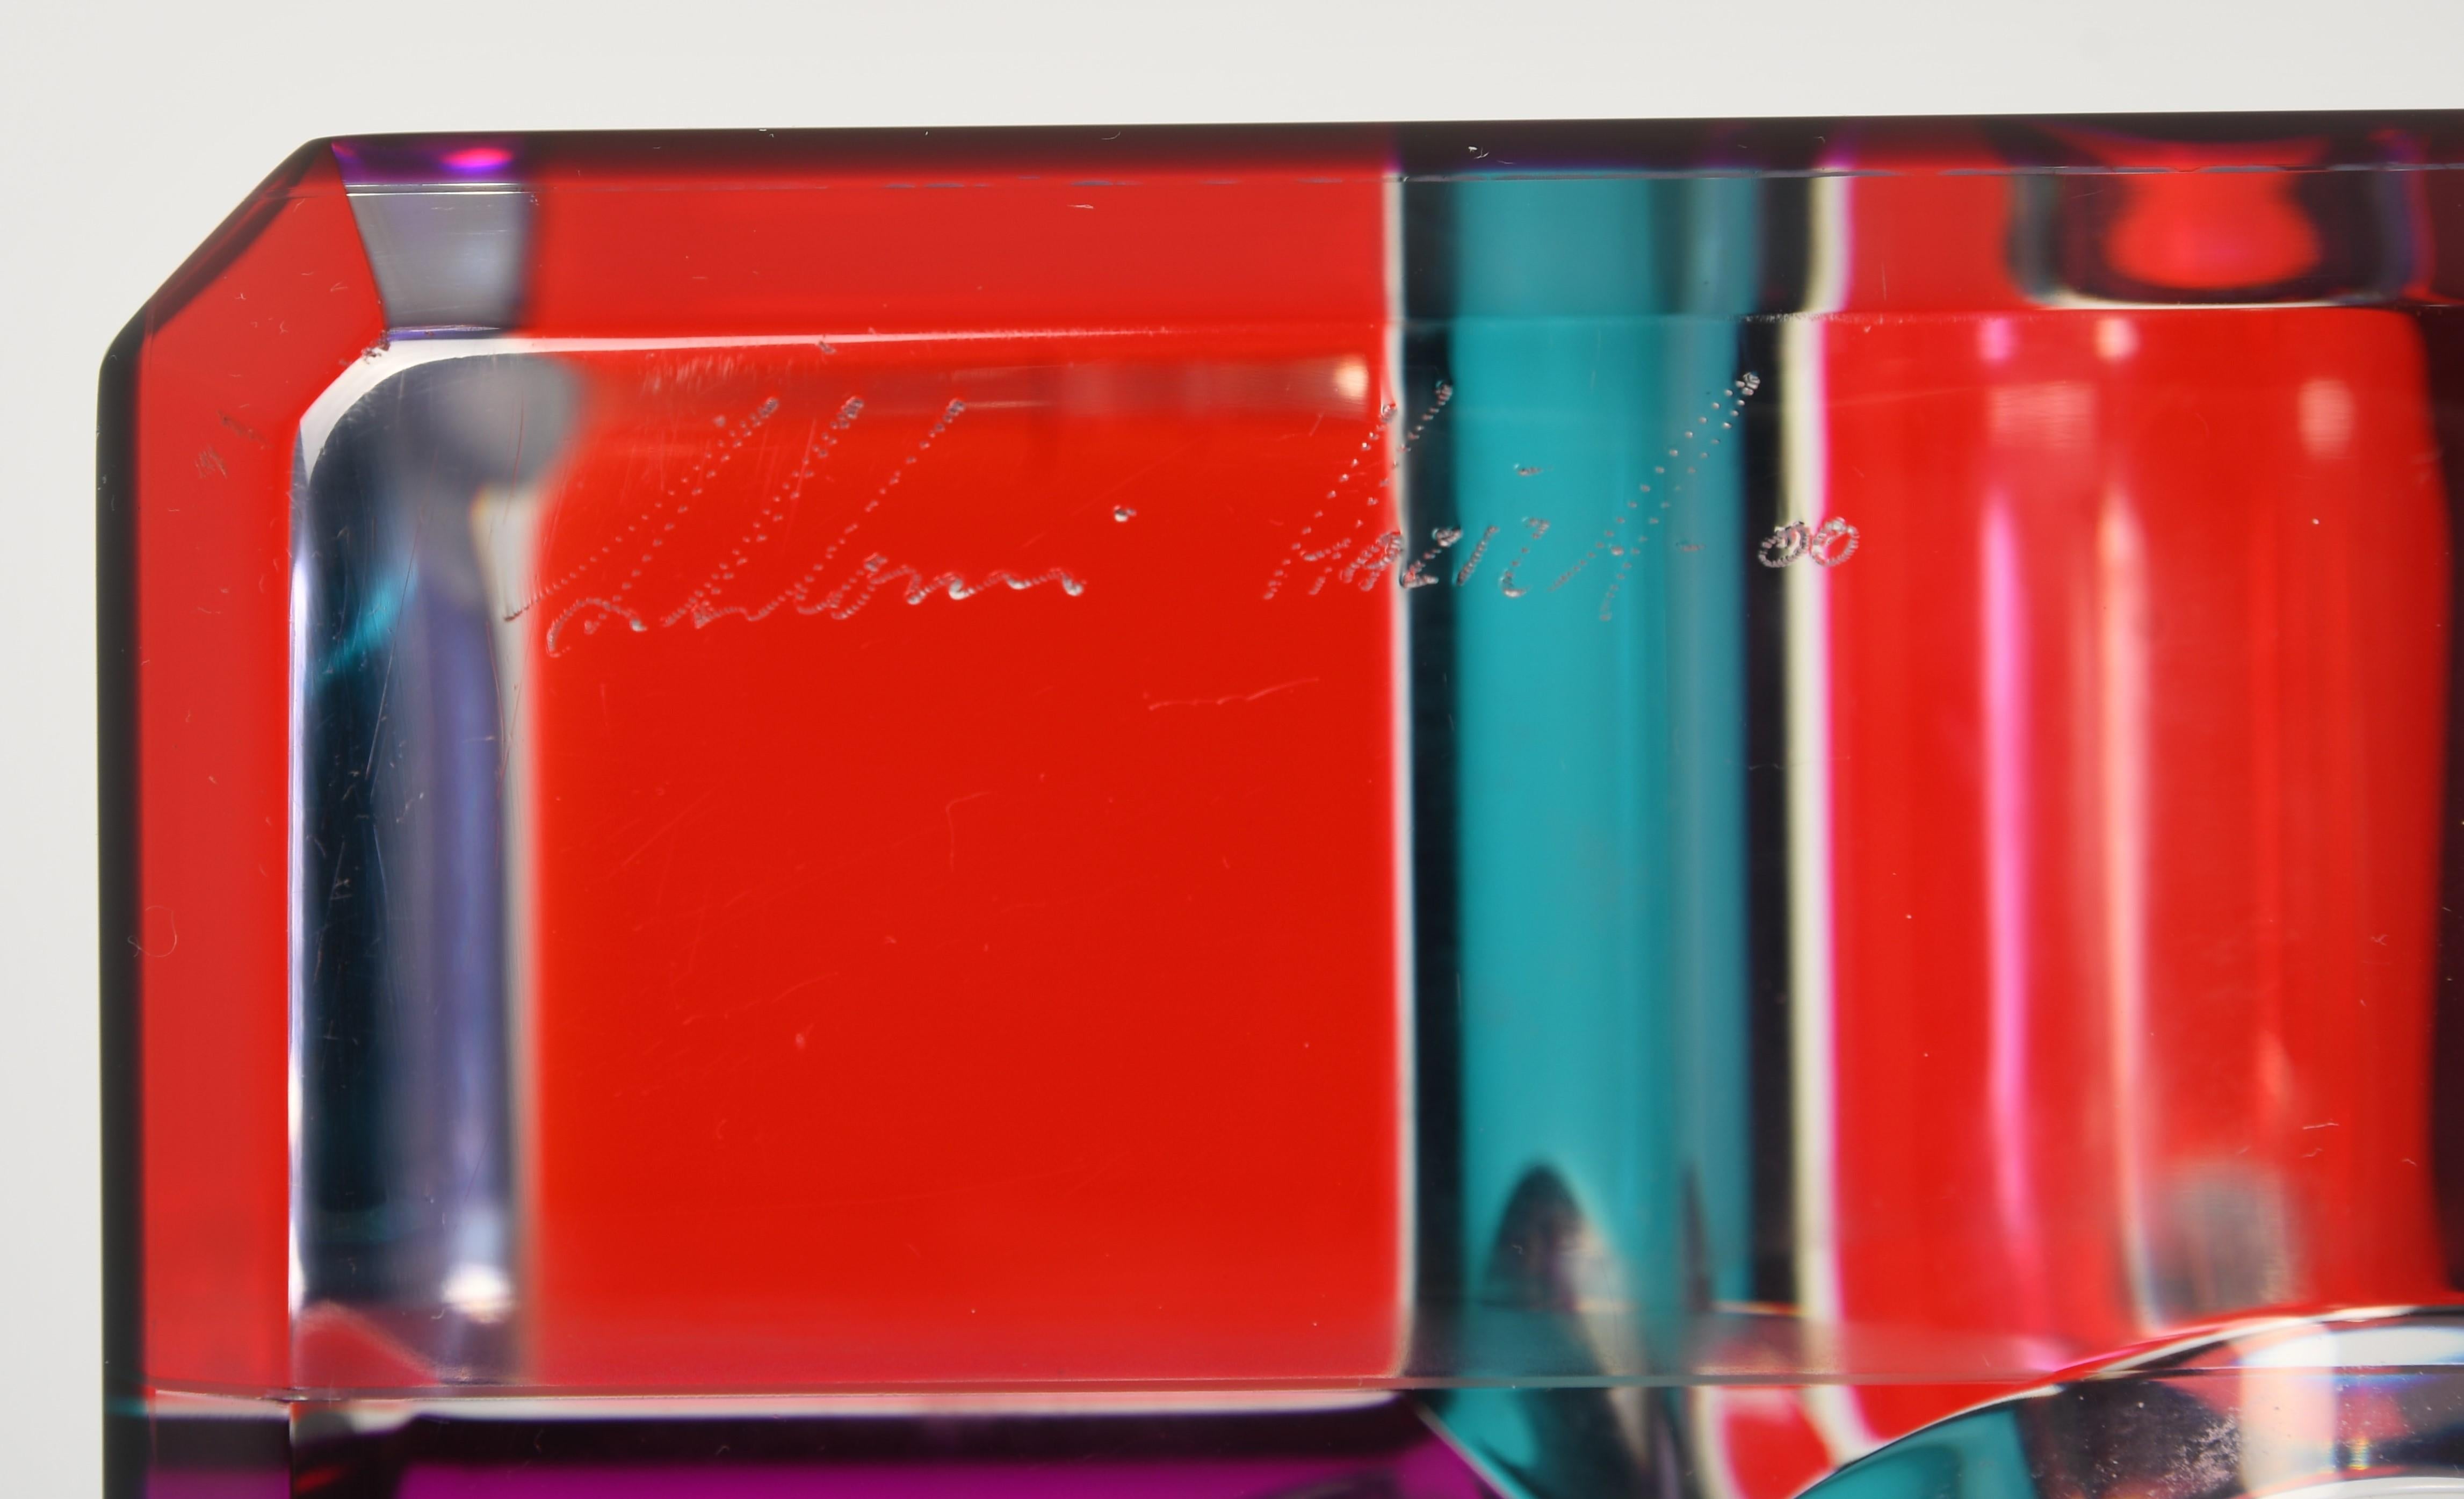 A stunning Pop Art Lucite sculpture by Shlomi Haziza. The cube sculpture is comprised of colored Lucite which refracts light on top of the black pedestal base. Signed Shlomi Haziza, as shown in images. Some minor scratches to the surface but not